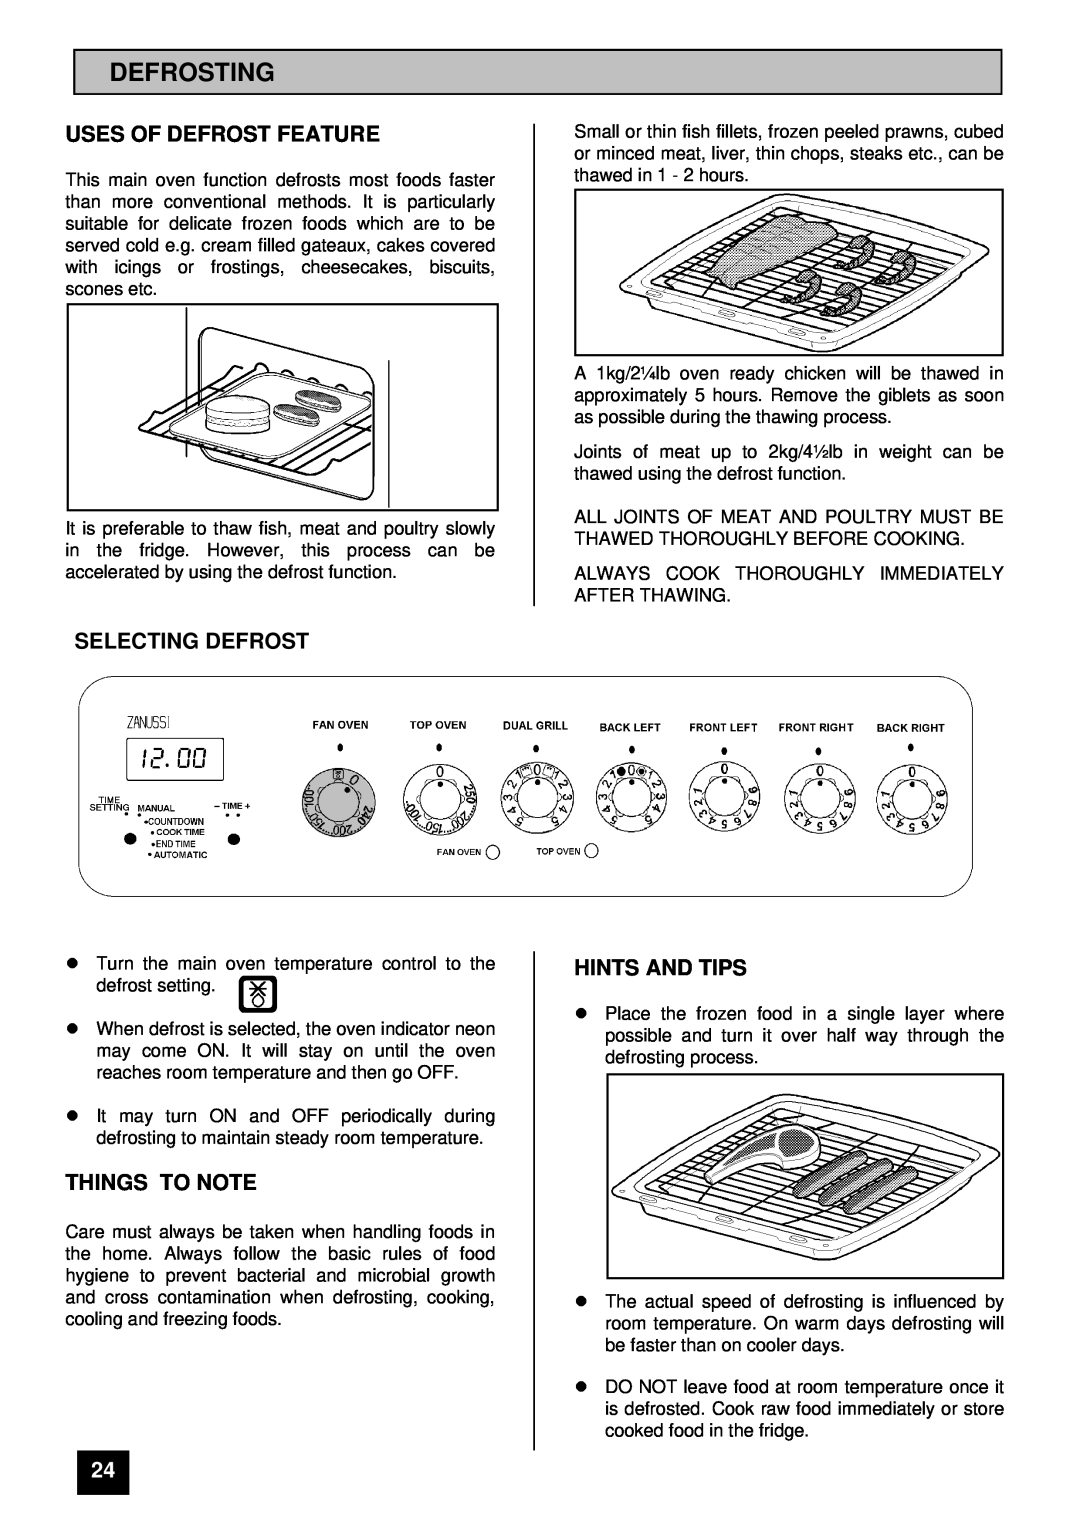 Zanussi ZCE ID manual Defrosting, Uses Of Defrost Feature, Selecting Defrost, Hints And Tips, Things To Note 